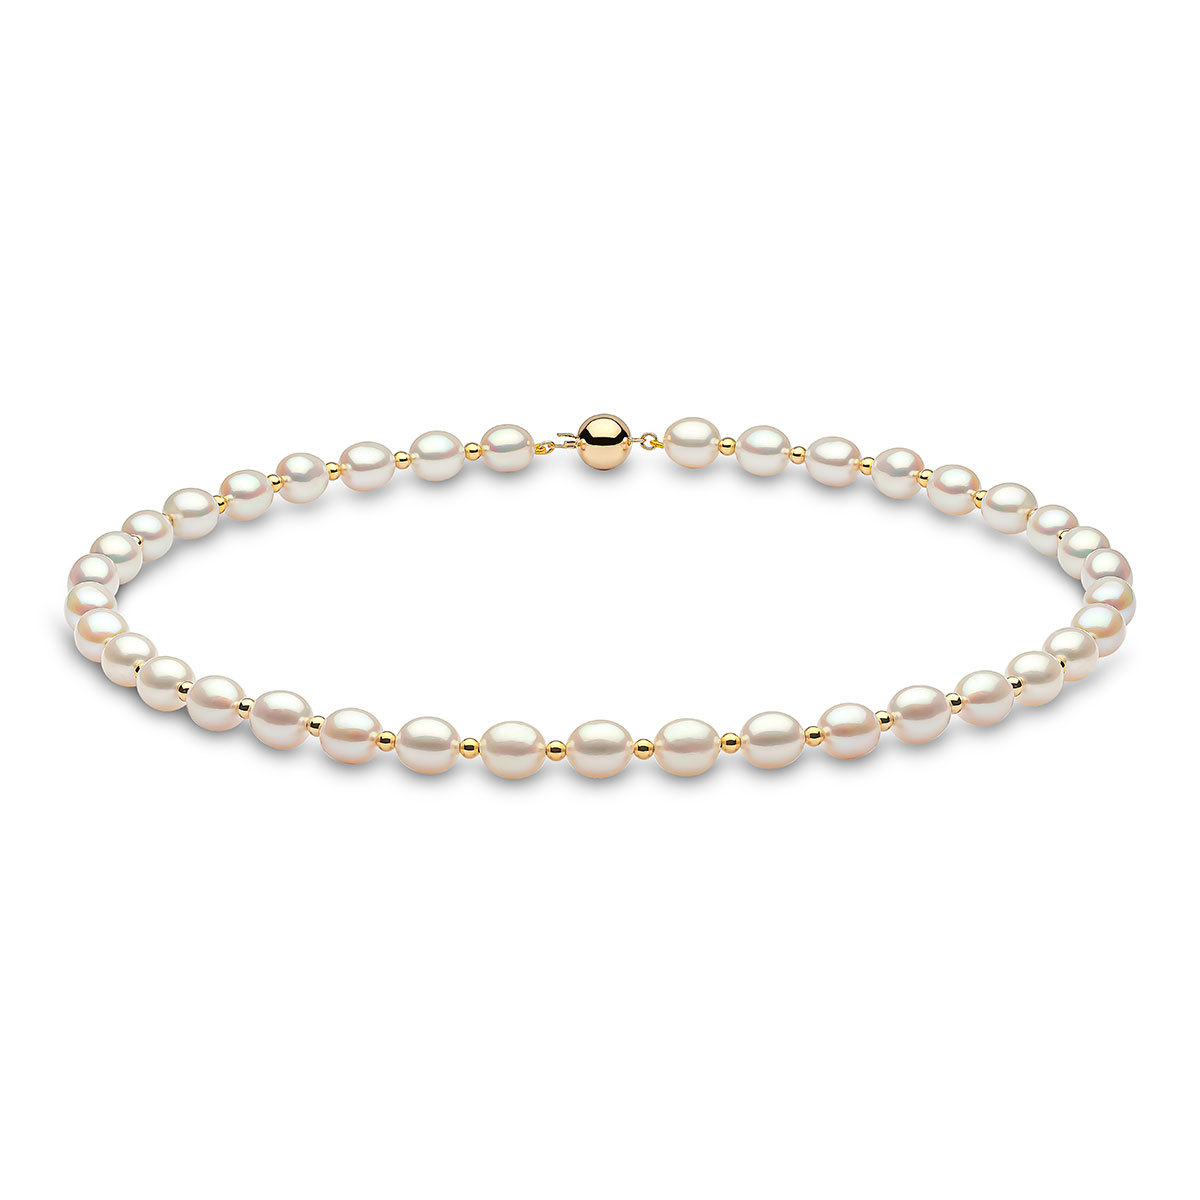 8-8.5mm Cultured Freshwater White Oval Pearl and Gold Bead Necklace, 18ct Yellow Gold